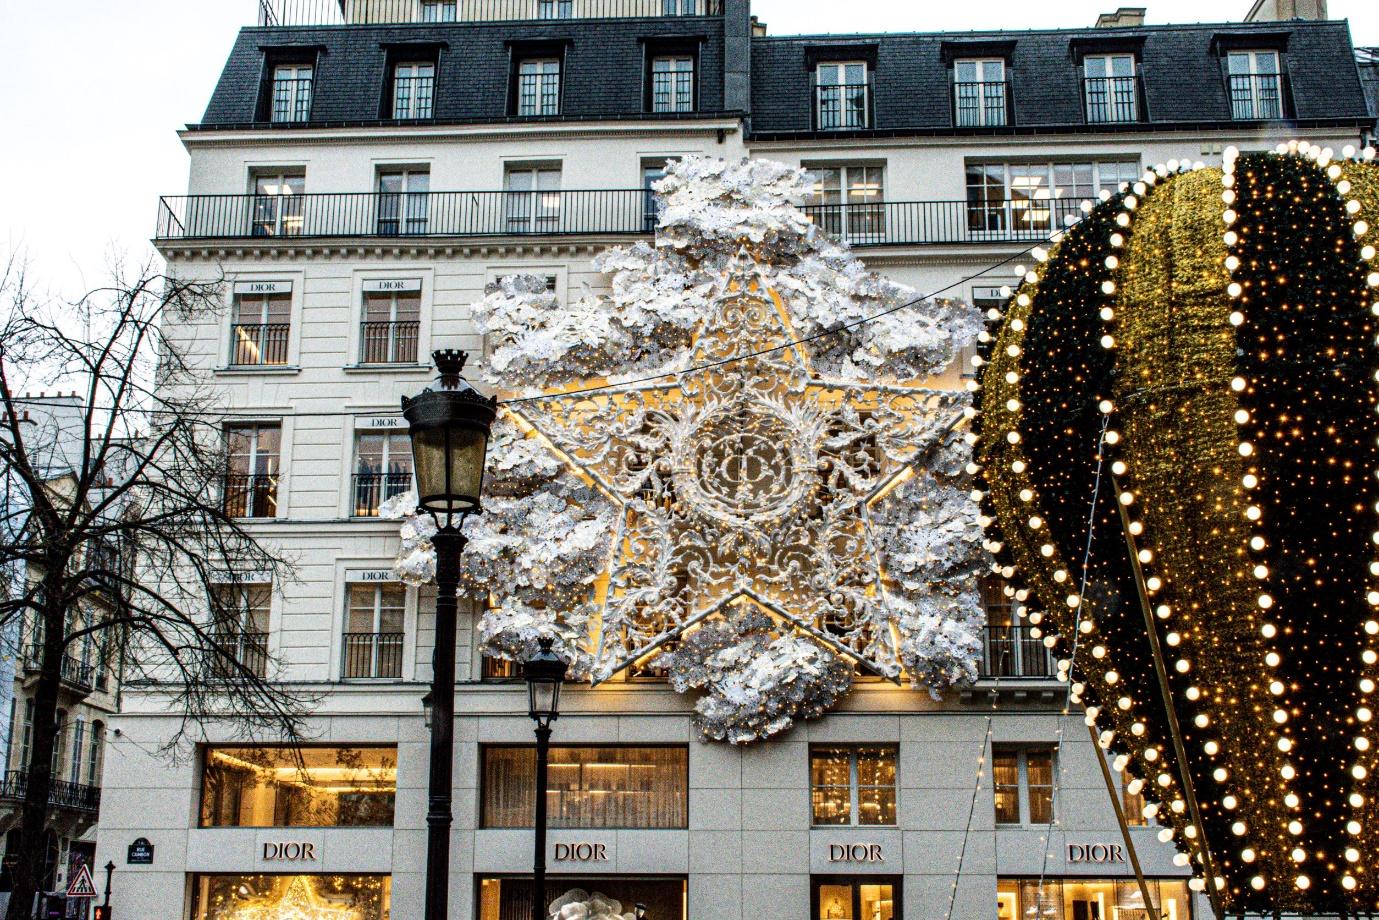 A building decorated for Christmas | Wedifys